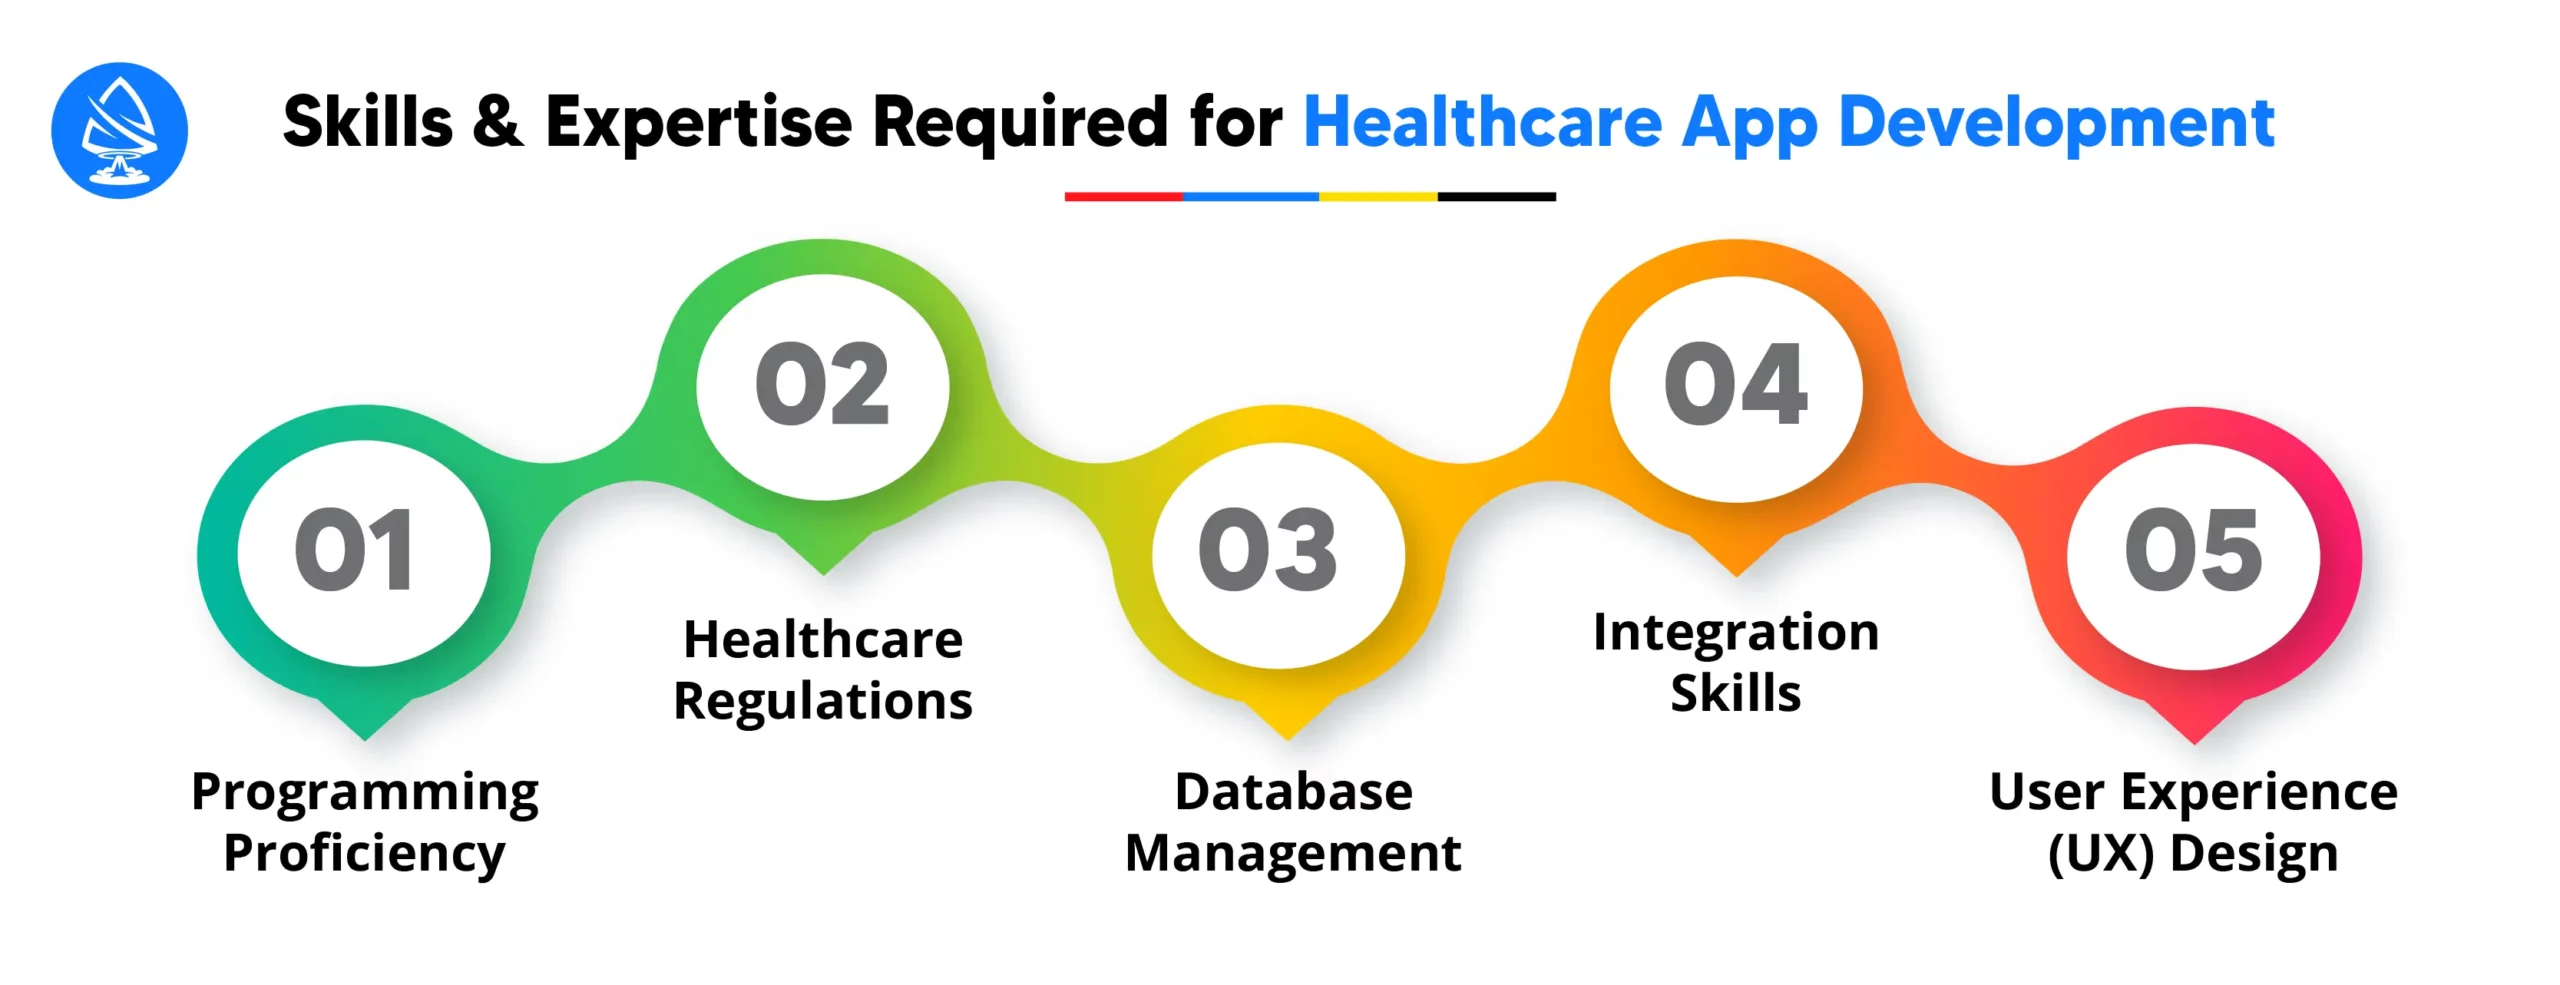 Skills and Expertise Required for Healthcare App Development